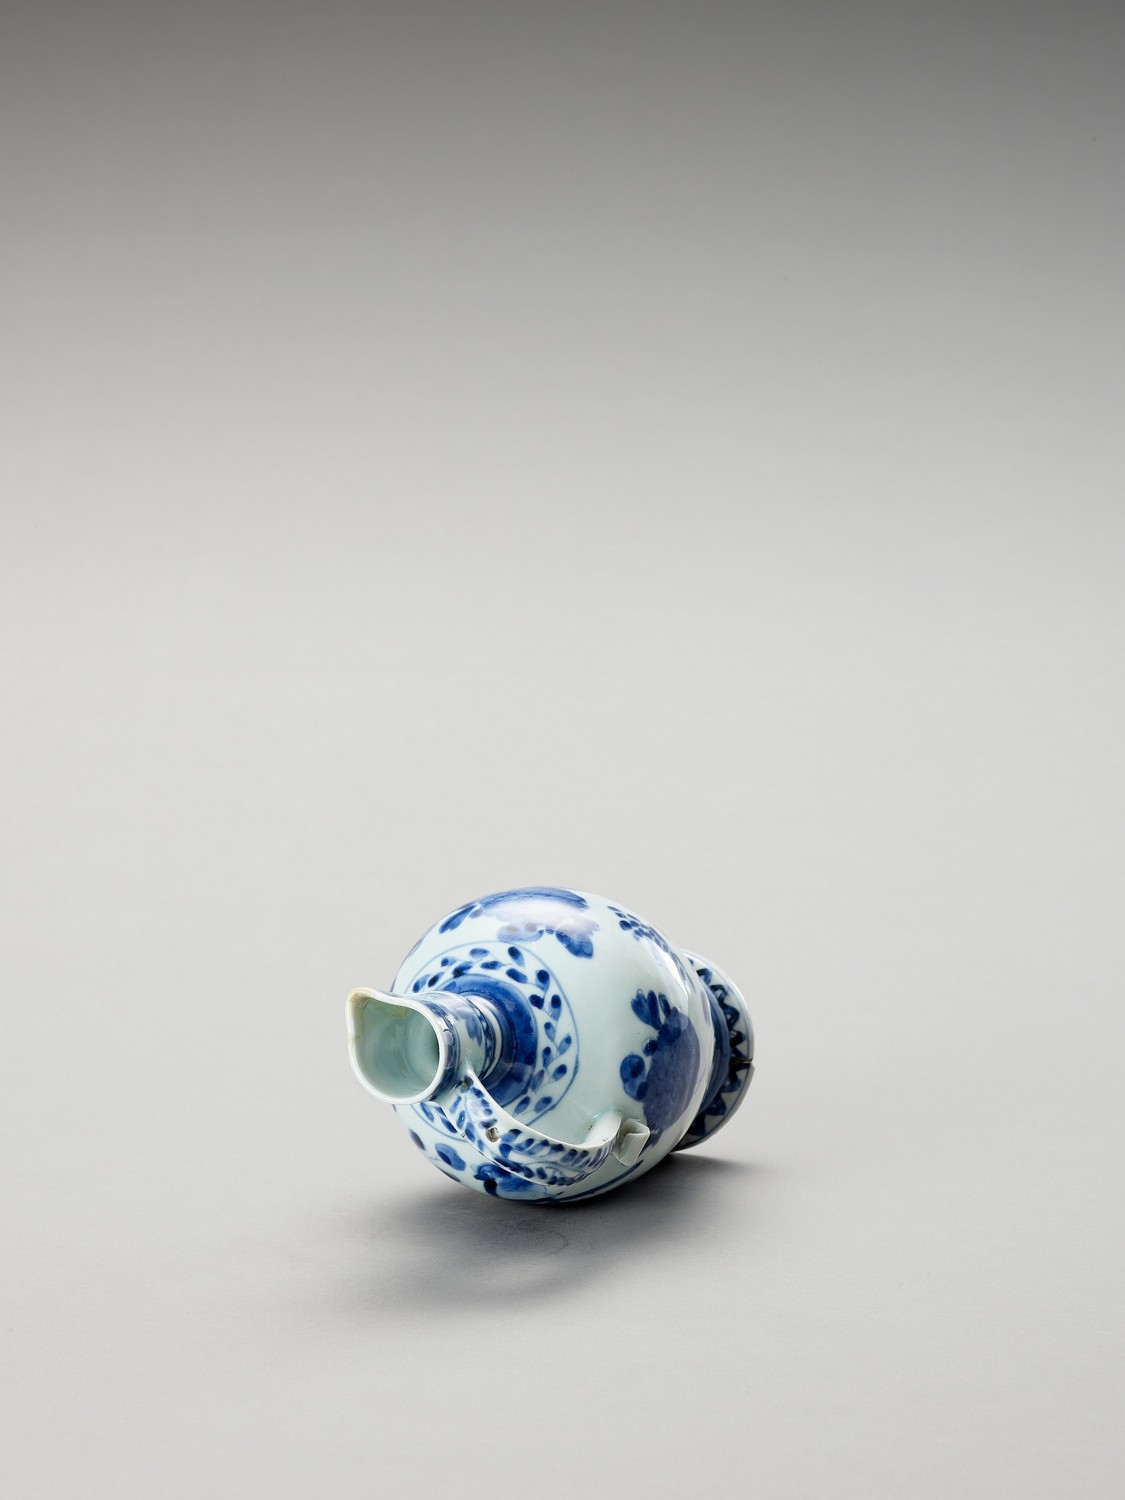 A BLUE AND WHITE PORCELAIN JUG - Image 6 of 7